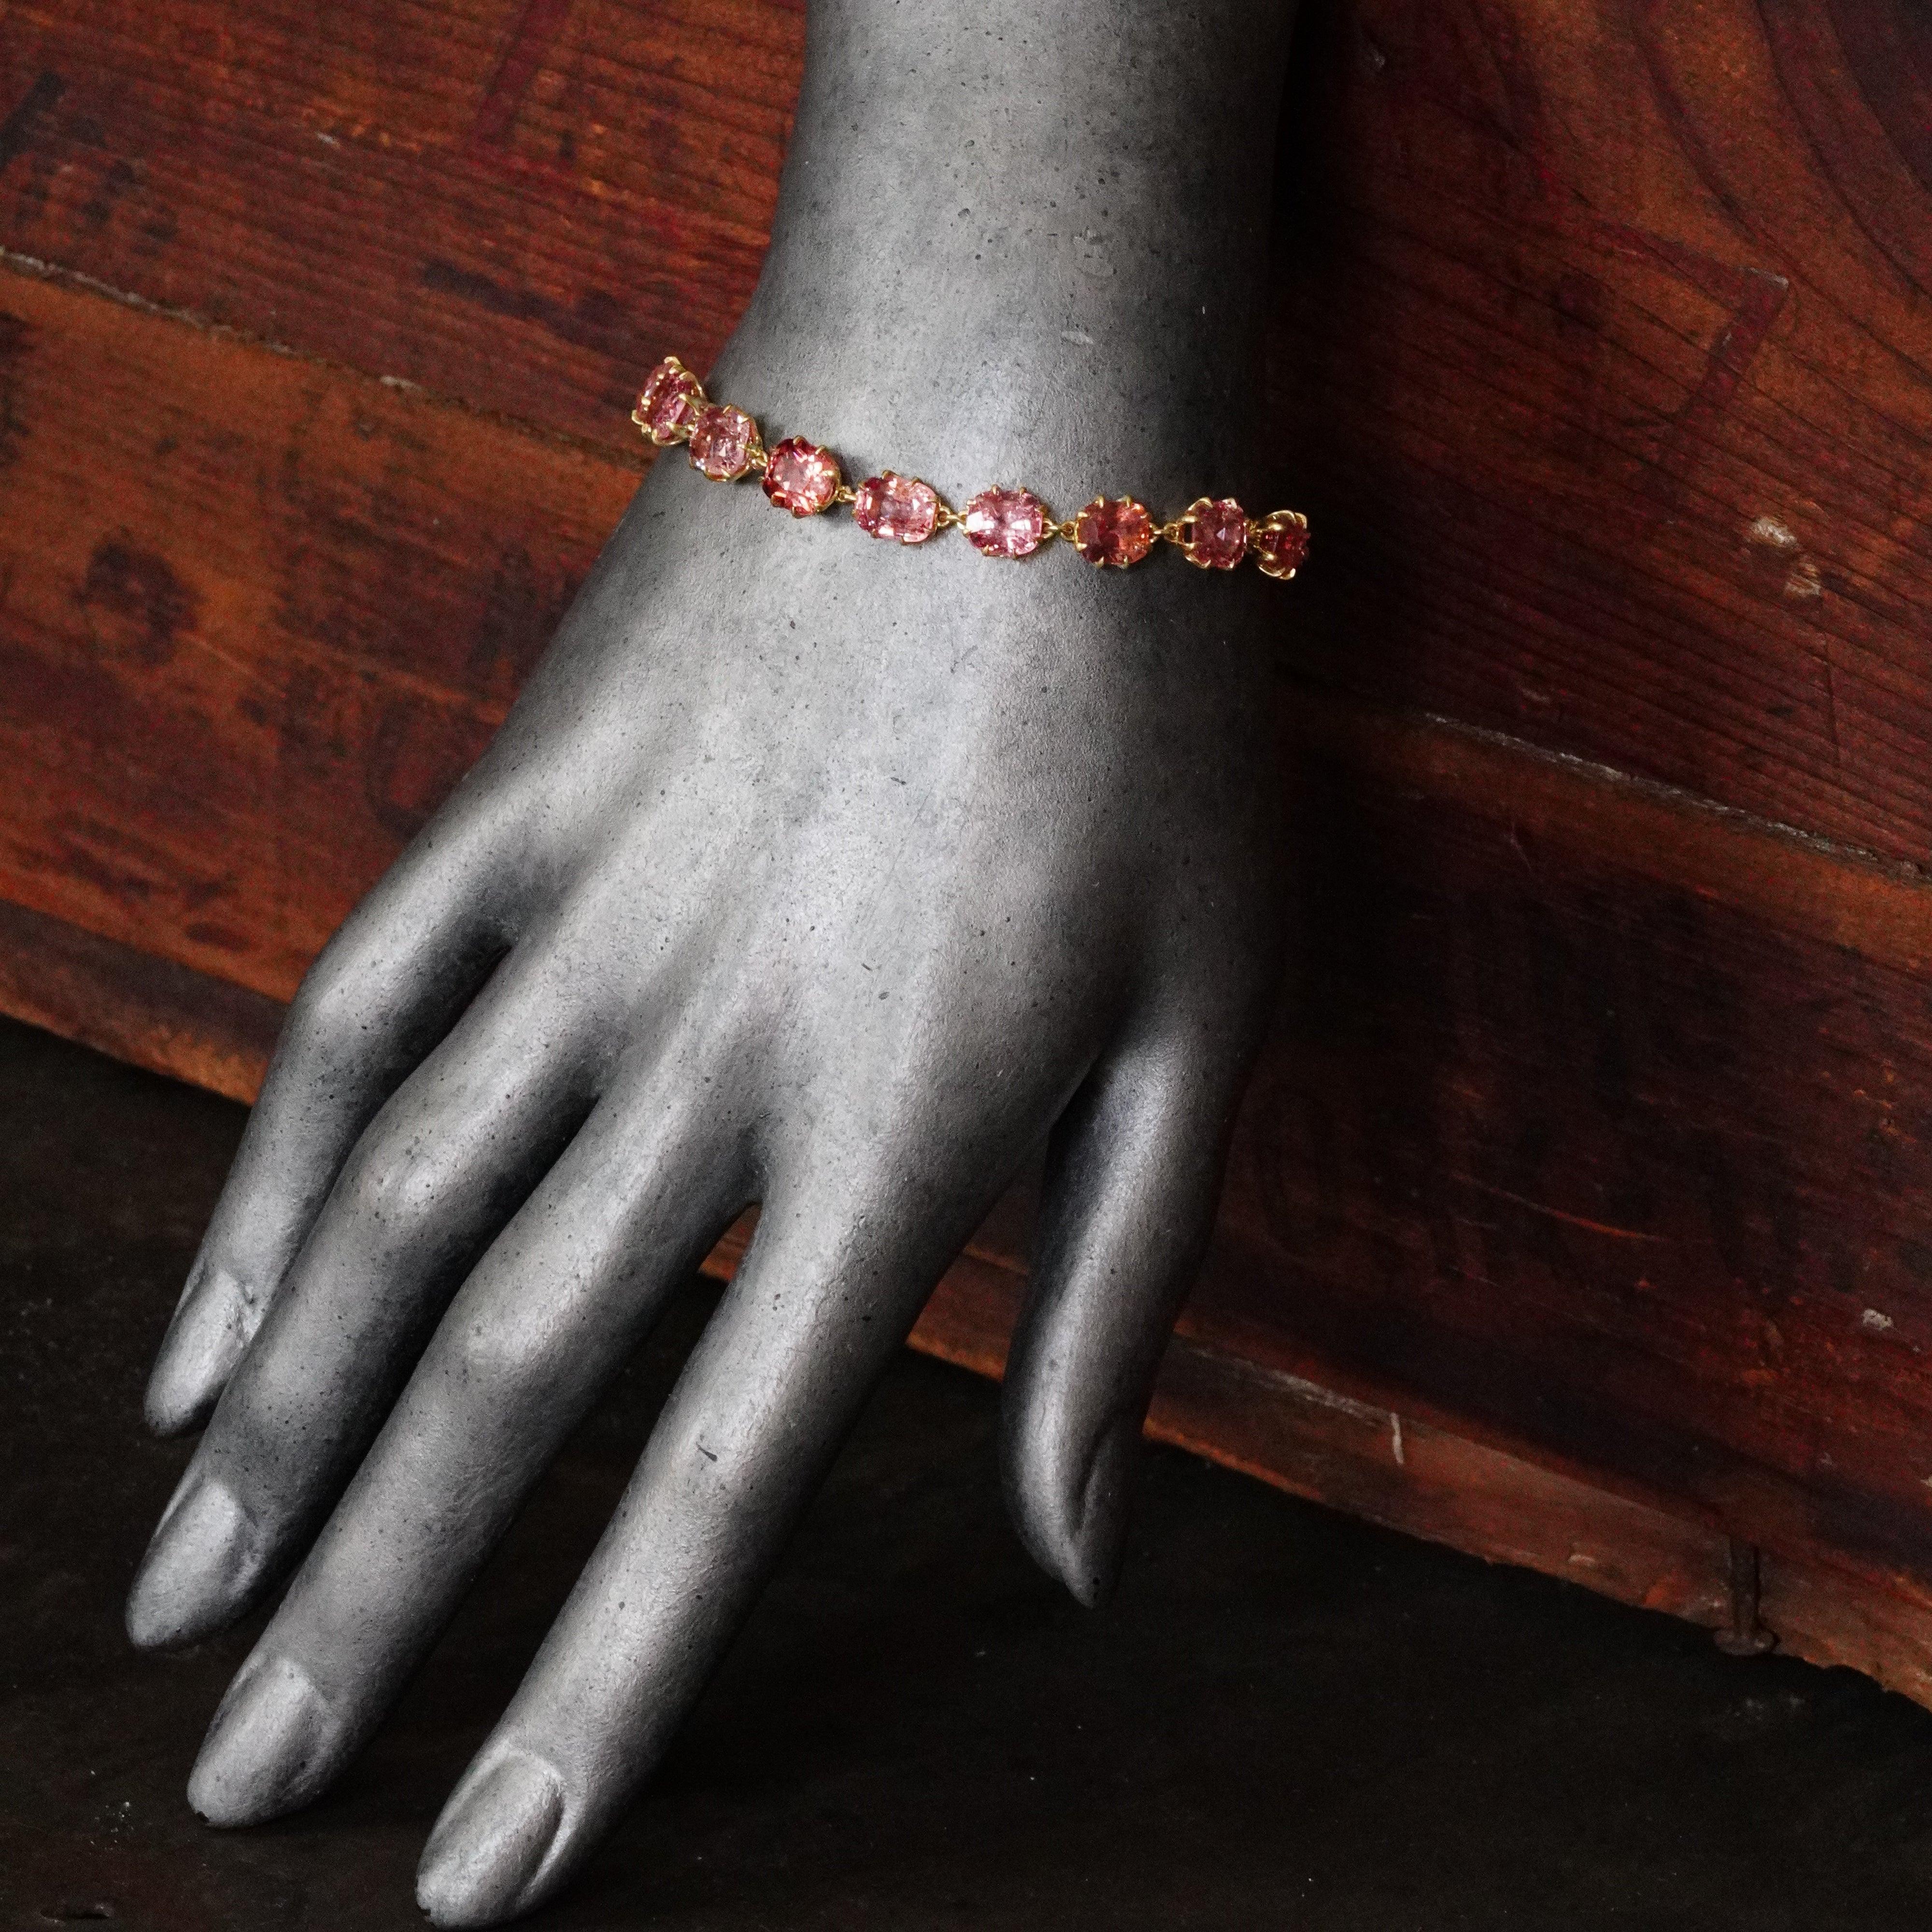 Statement piece: Victorian-style 27 CT cushion cut pink spinel bracelet by Anup Jogani